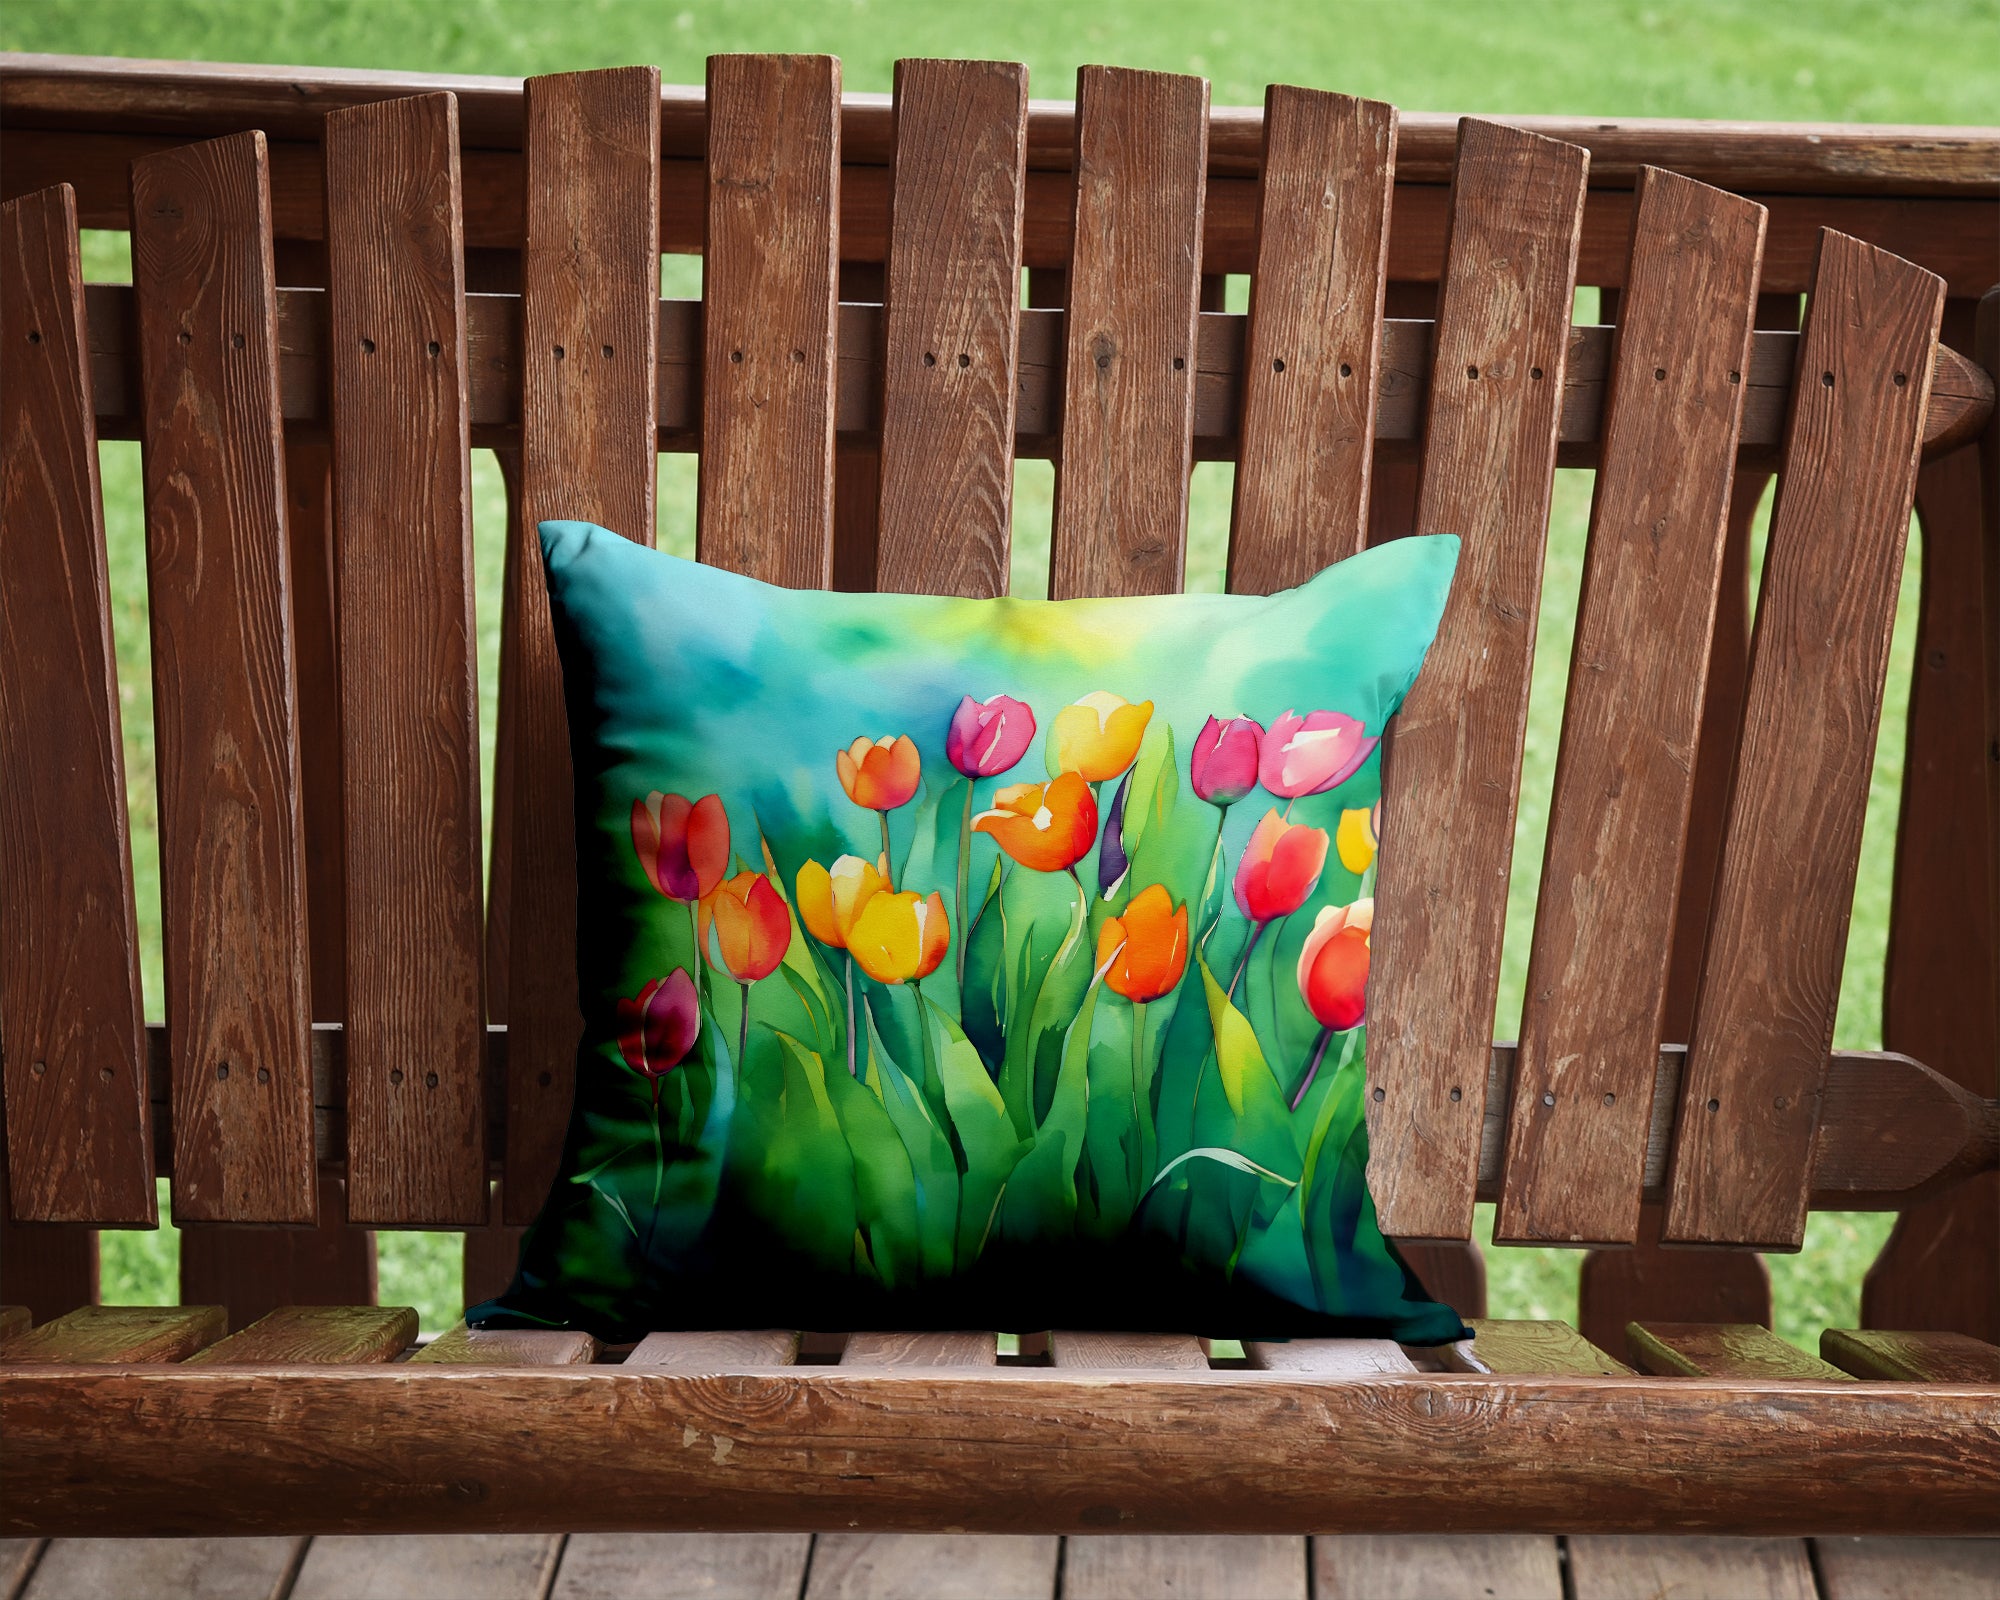 Buy this Tulips in Watercolor Throw Pillow